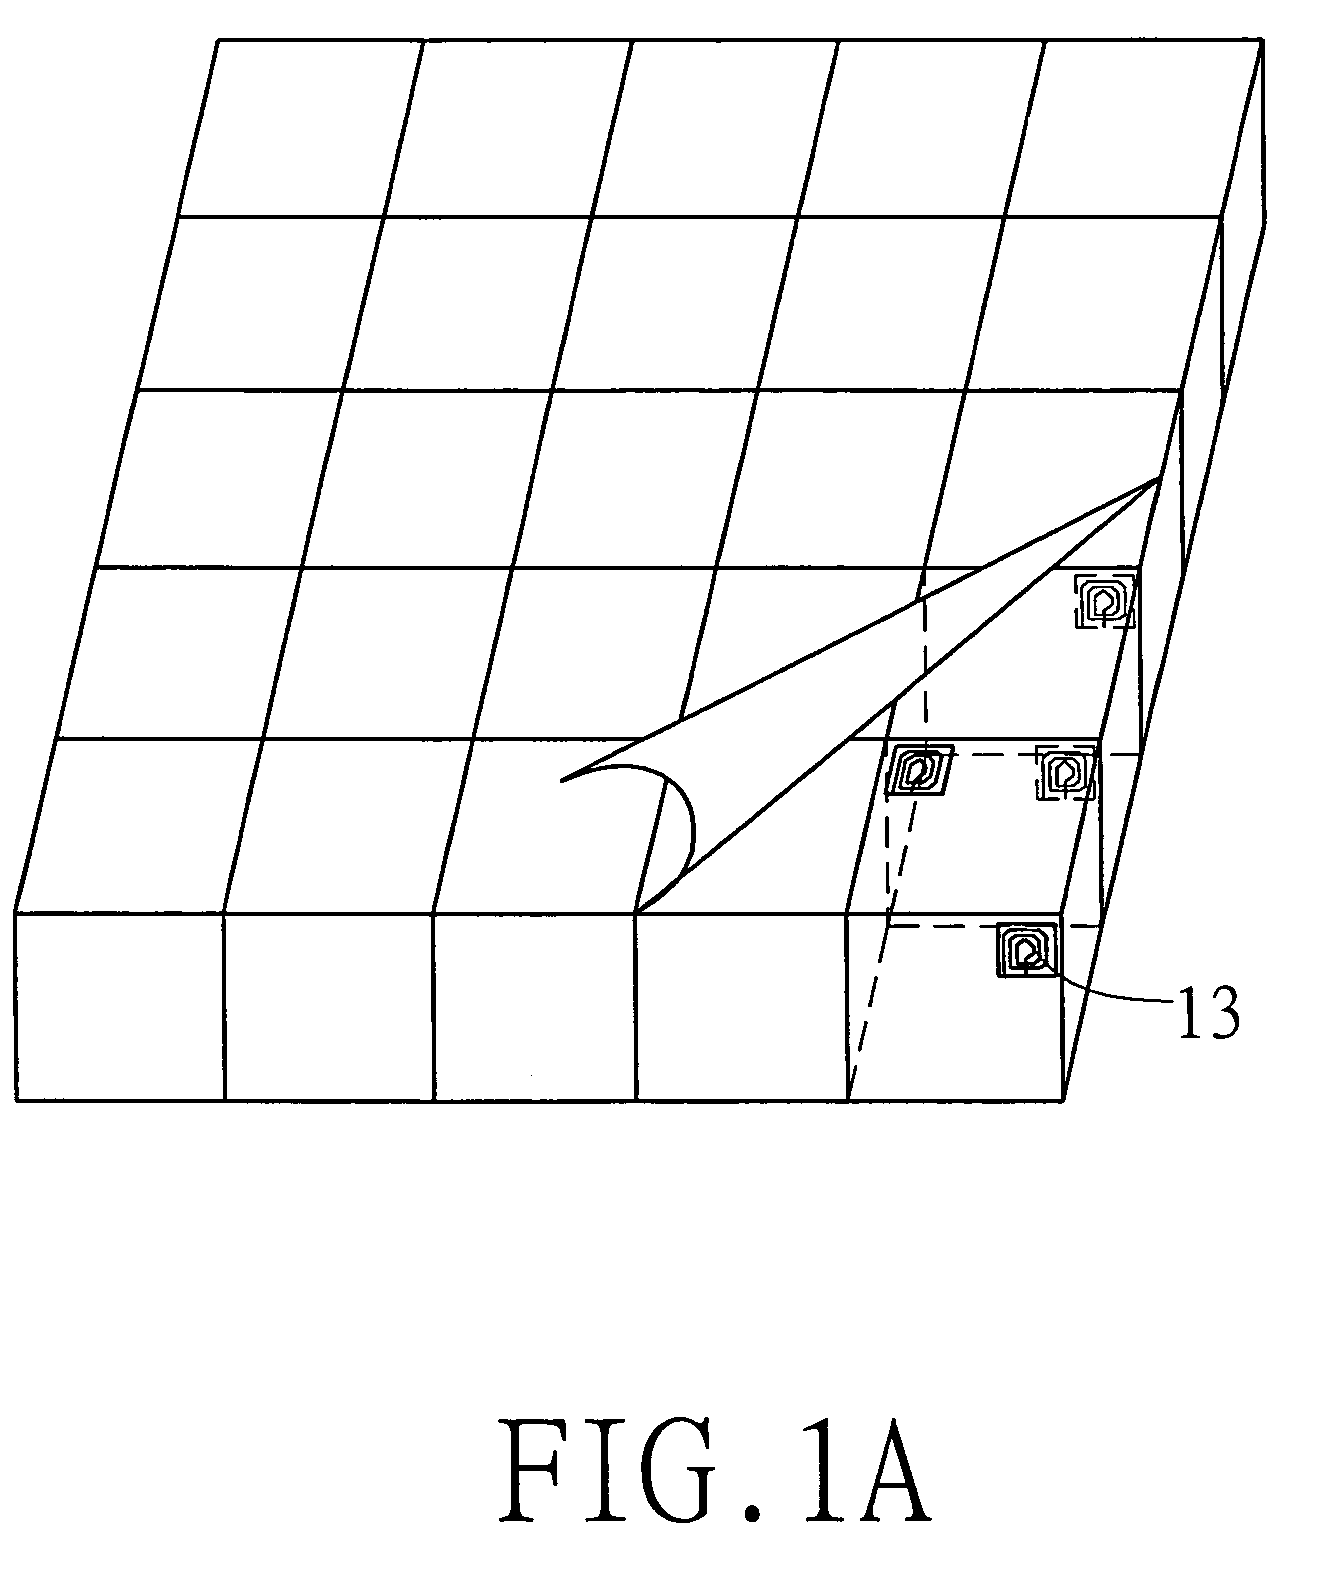 Multi-dimensional antenna in RFID system for reading tags and orientating multi-dimensional objects